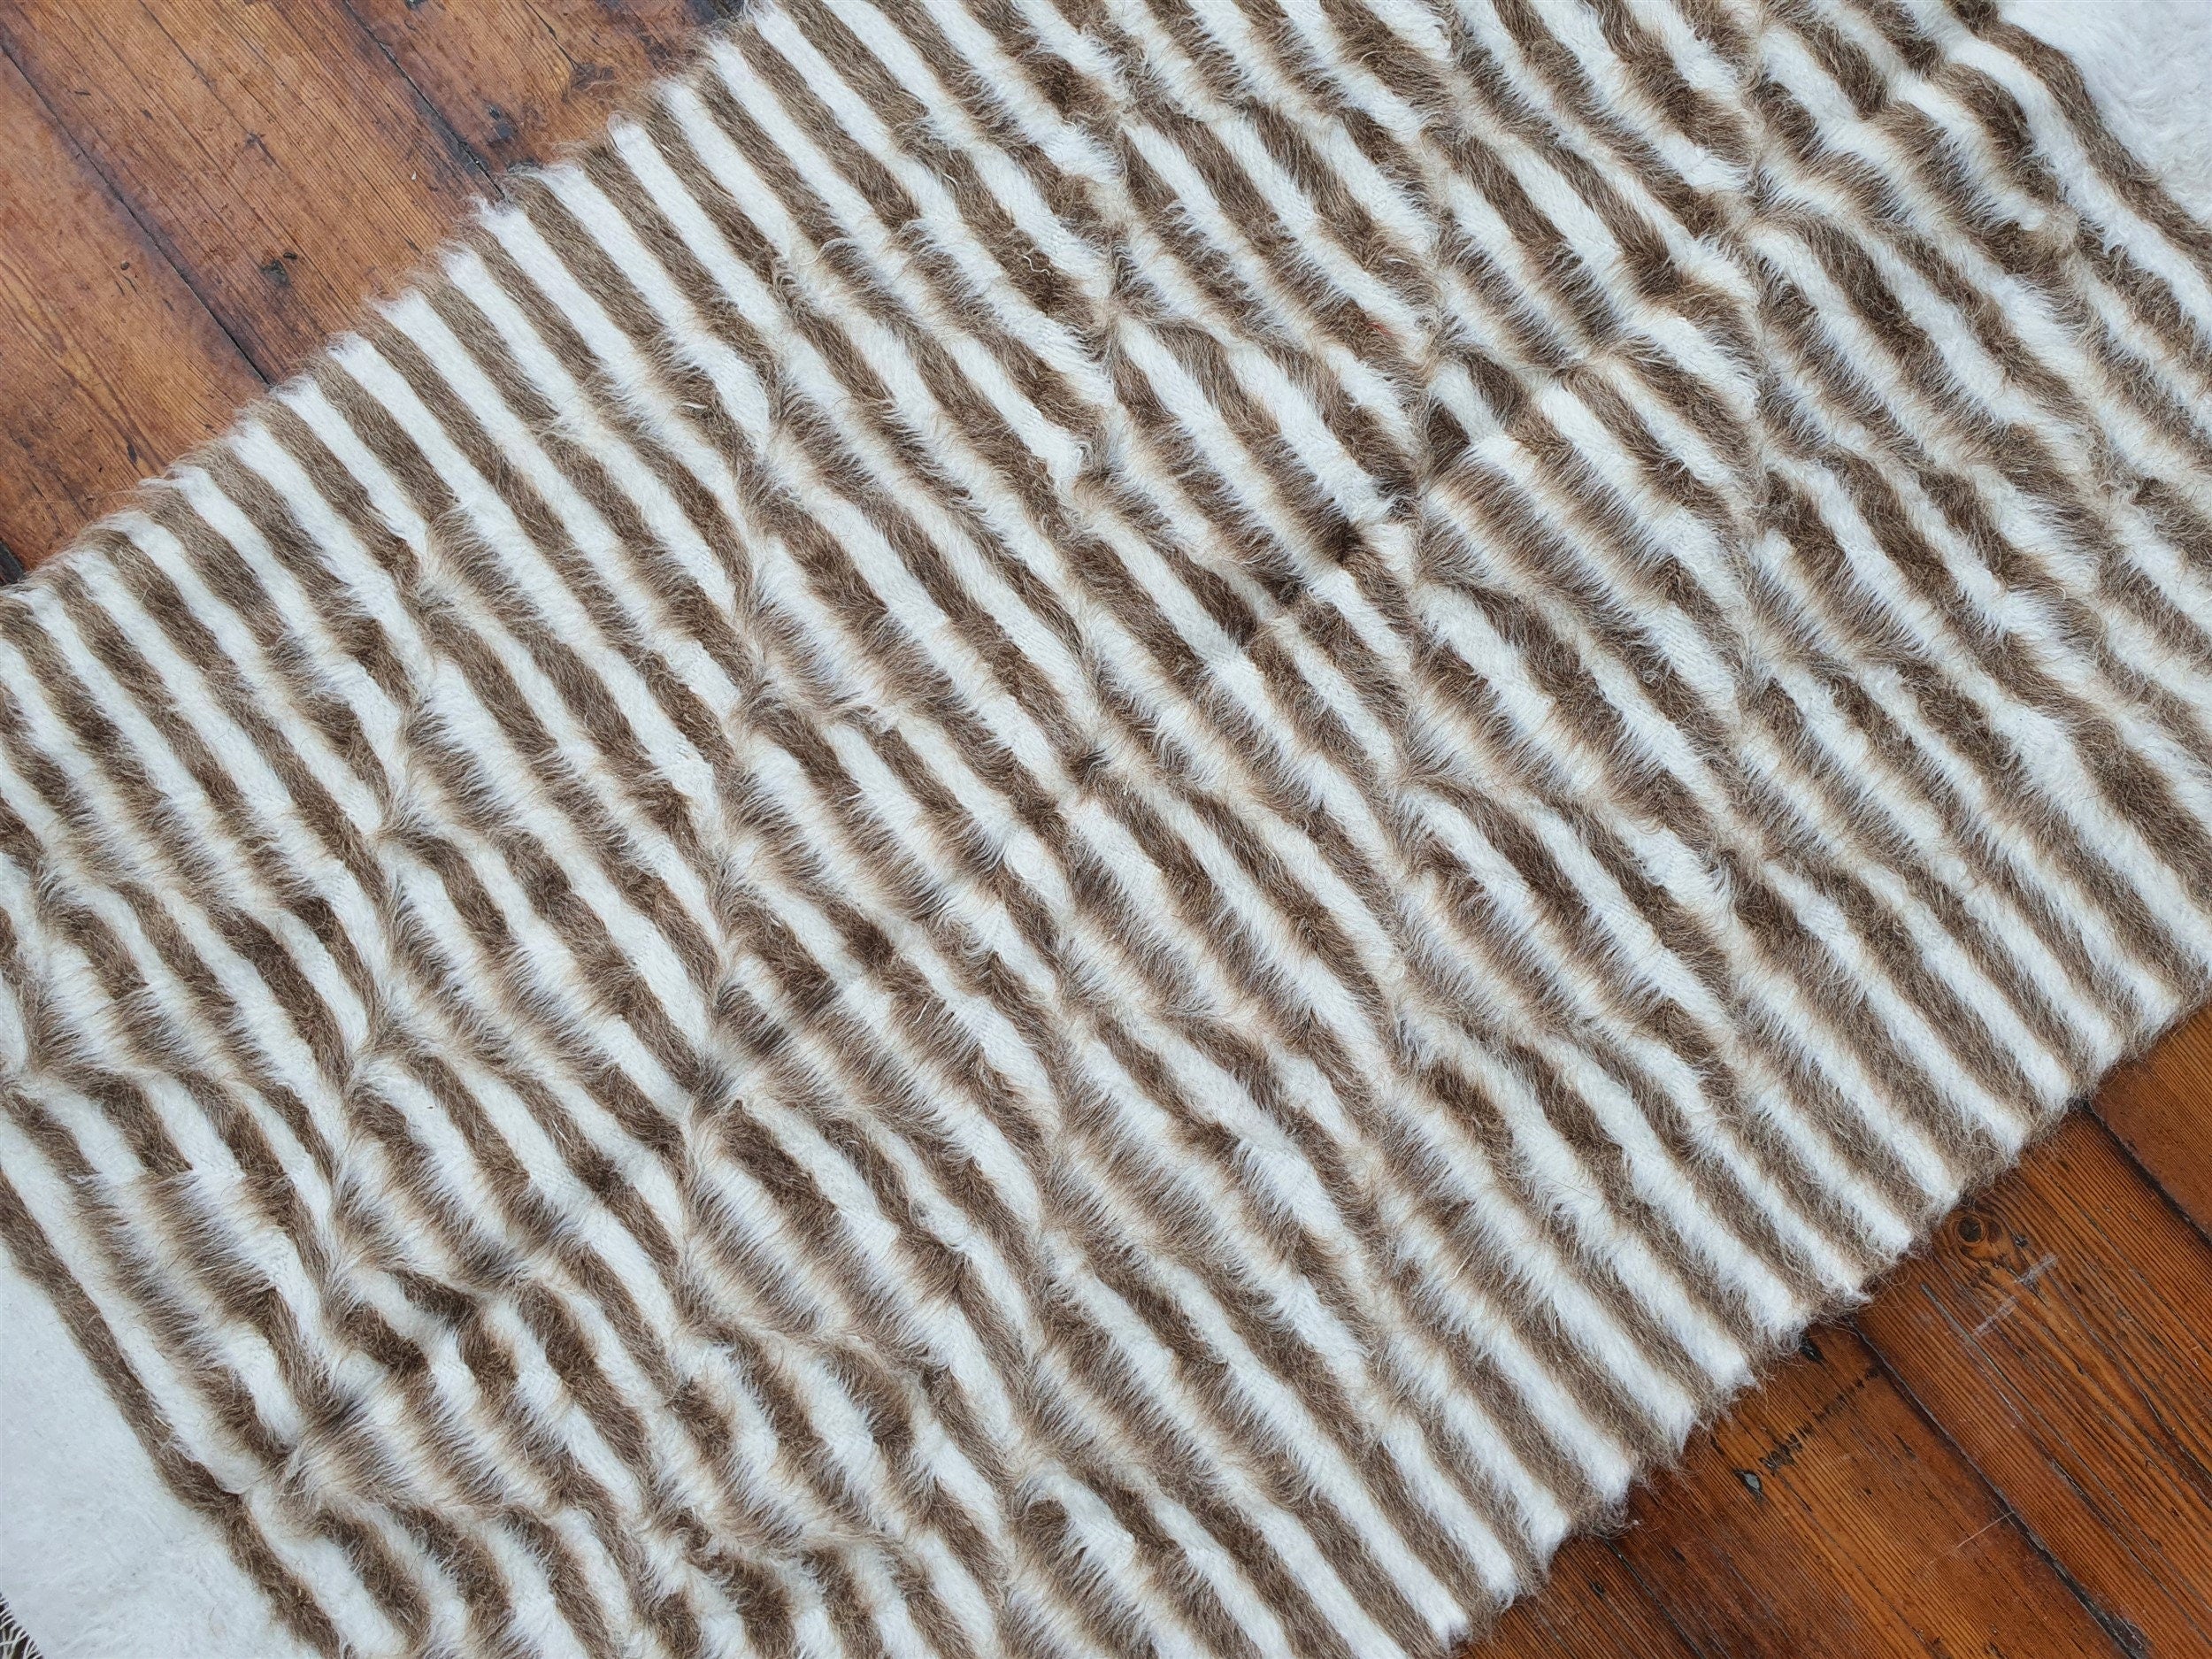 Undyed Siirt Angora Mohair Rug 4 ft x 2 ft 5 in, Brown and White Turkish Tulu Kilim Door Mat